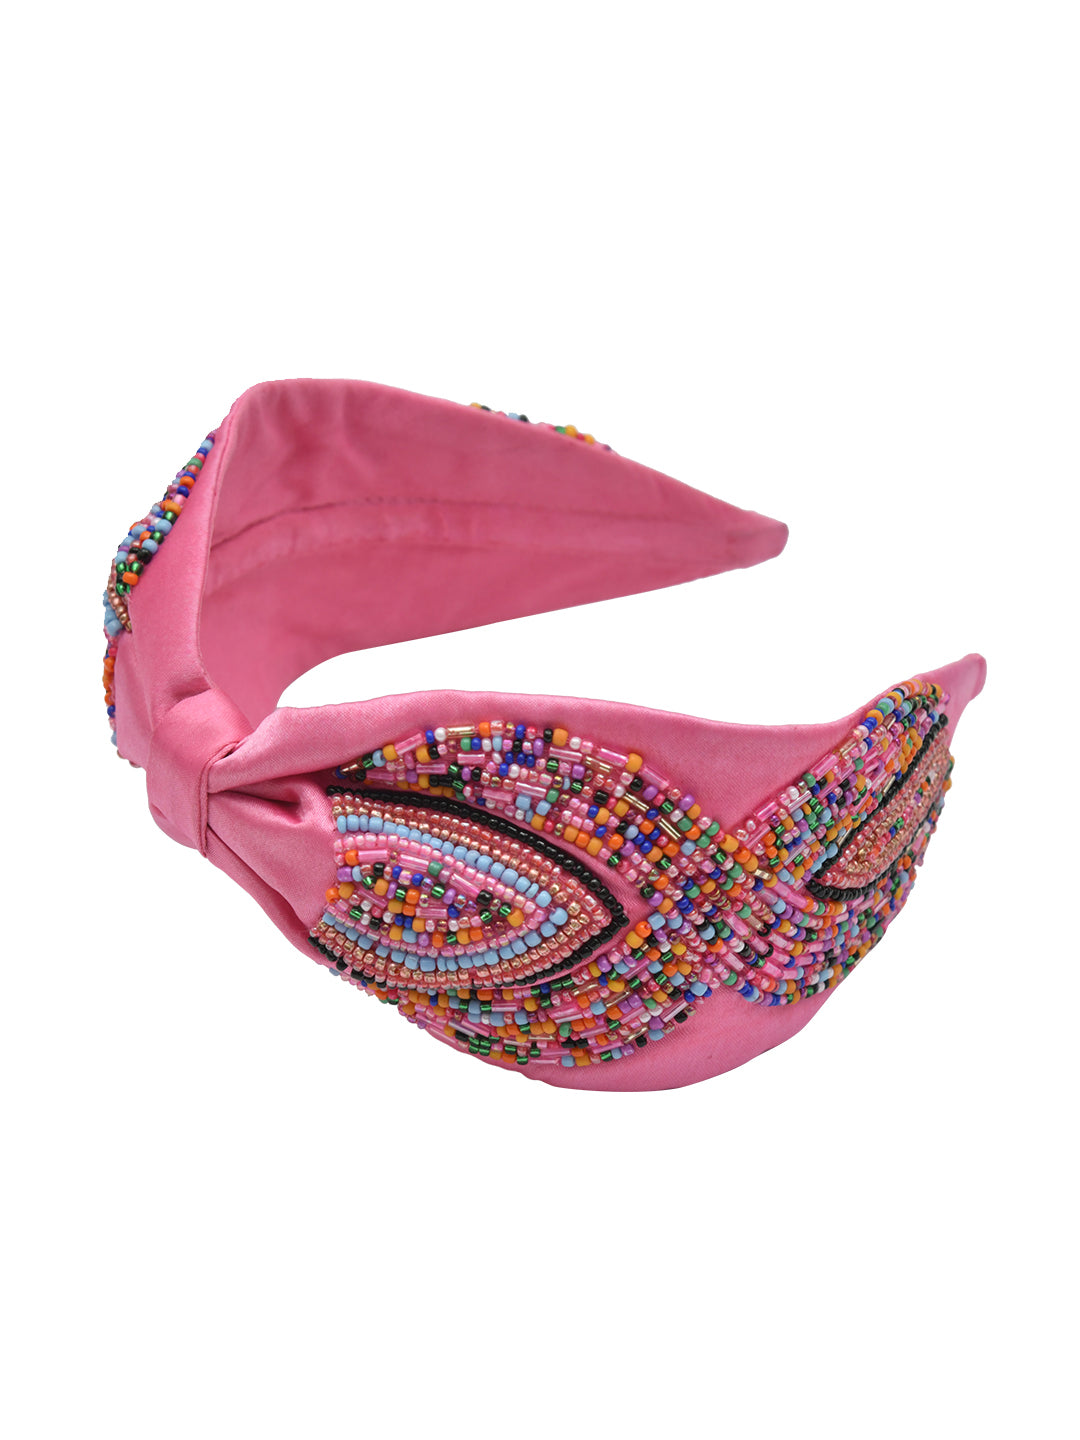 Pink Embroidered Knotted Girls Hairband